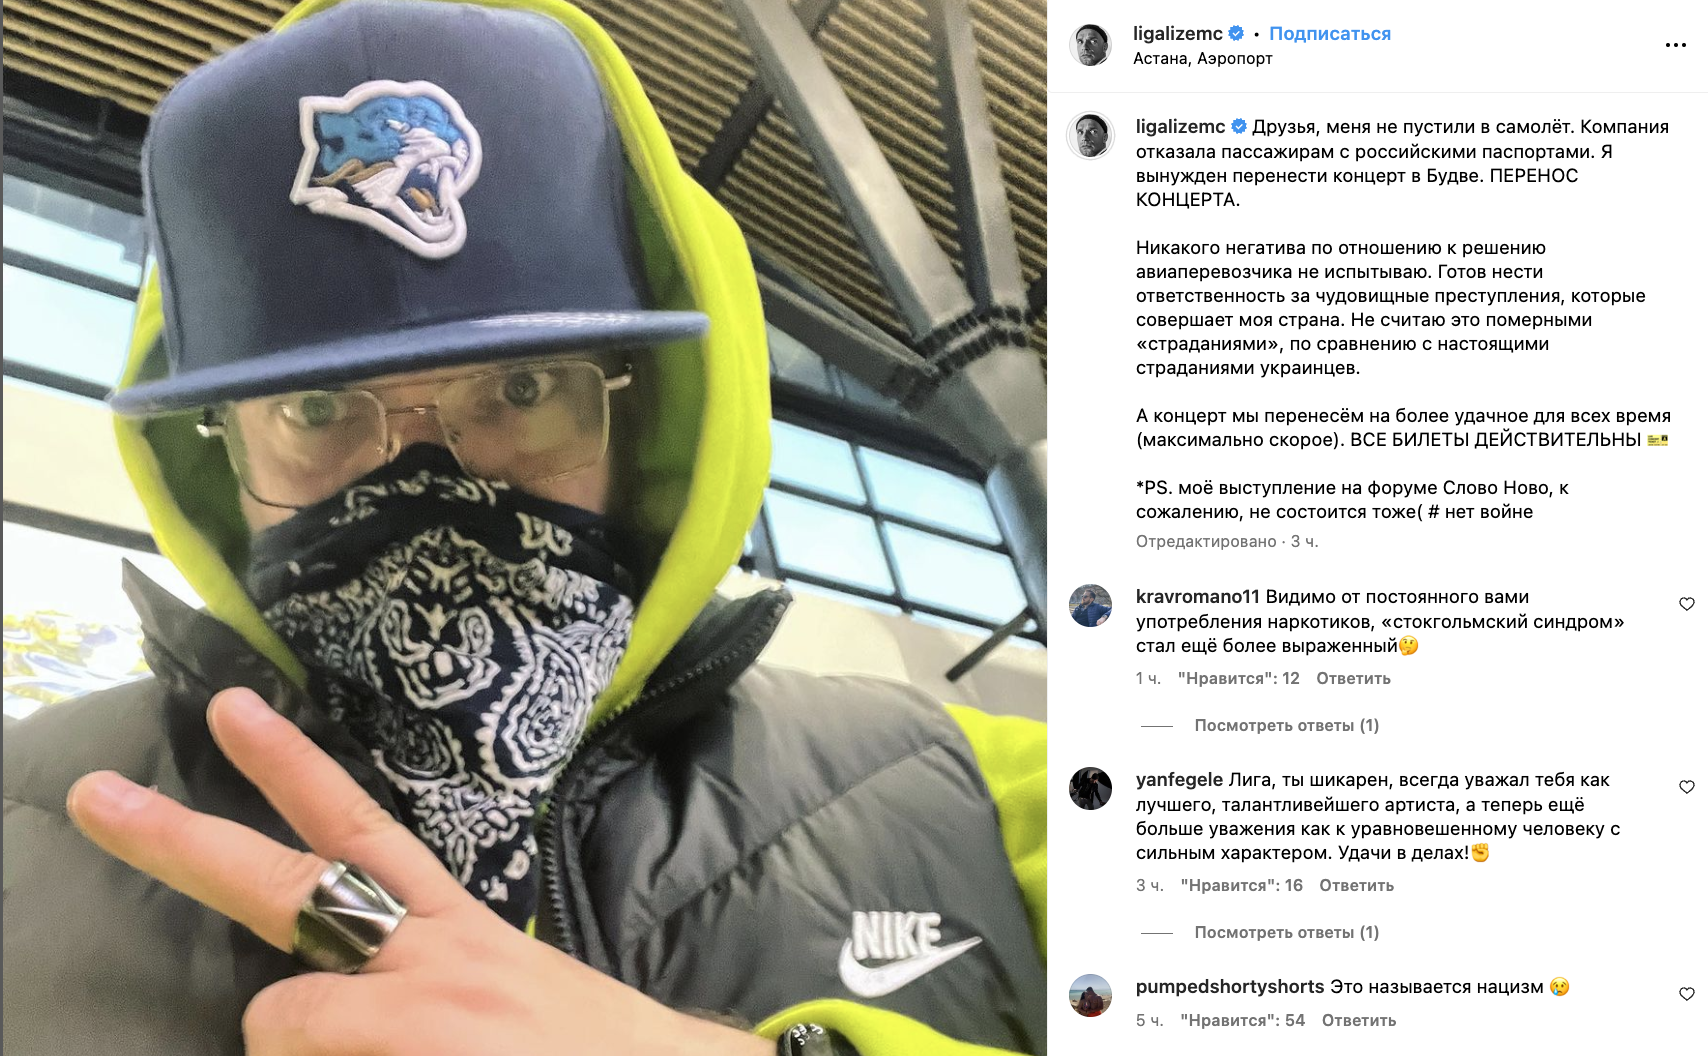 Russian rapper was not allowed to board a Polish airline plane, and he mentioned the suffering of Ukrainians